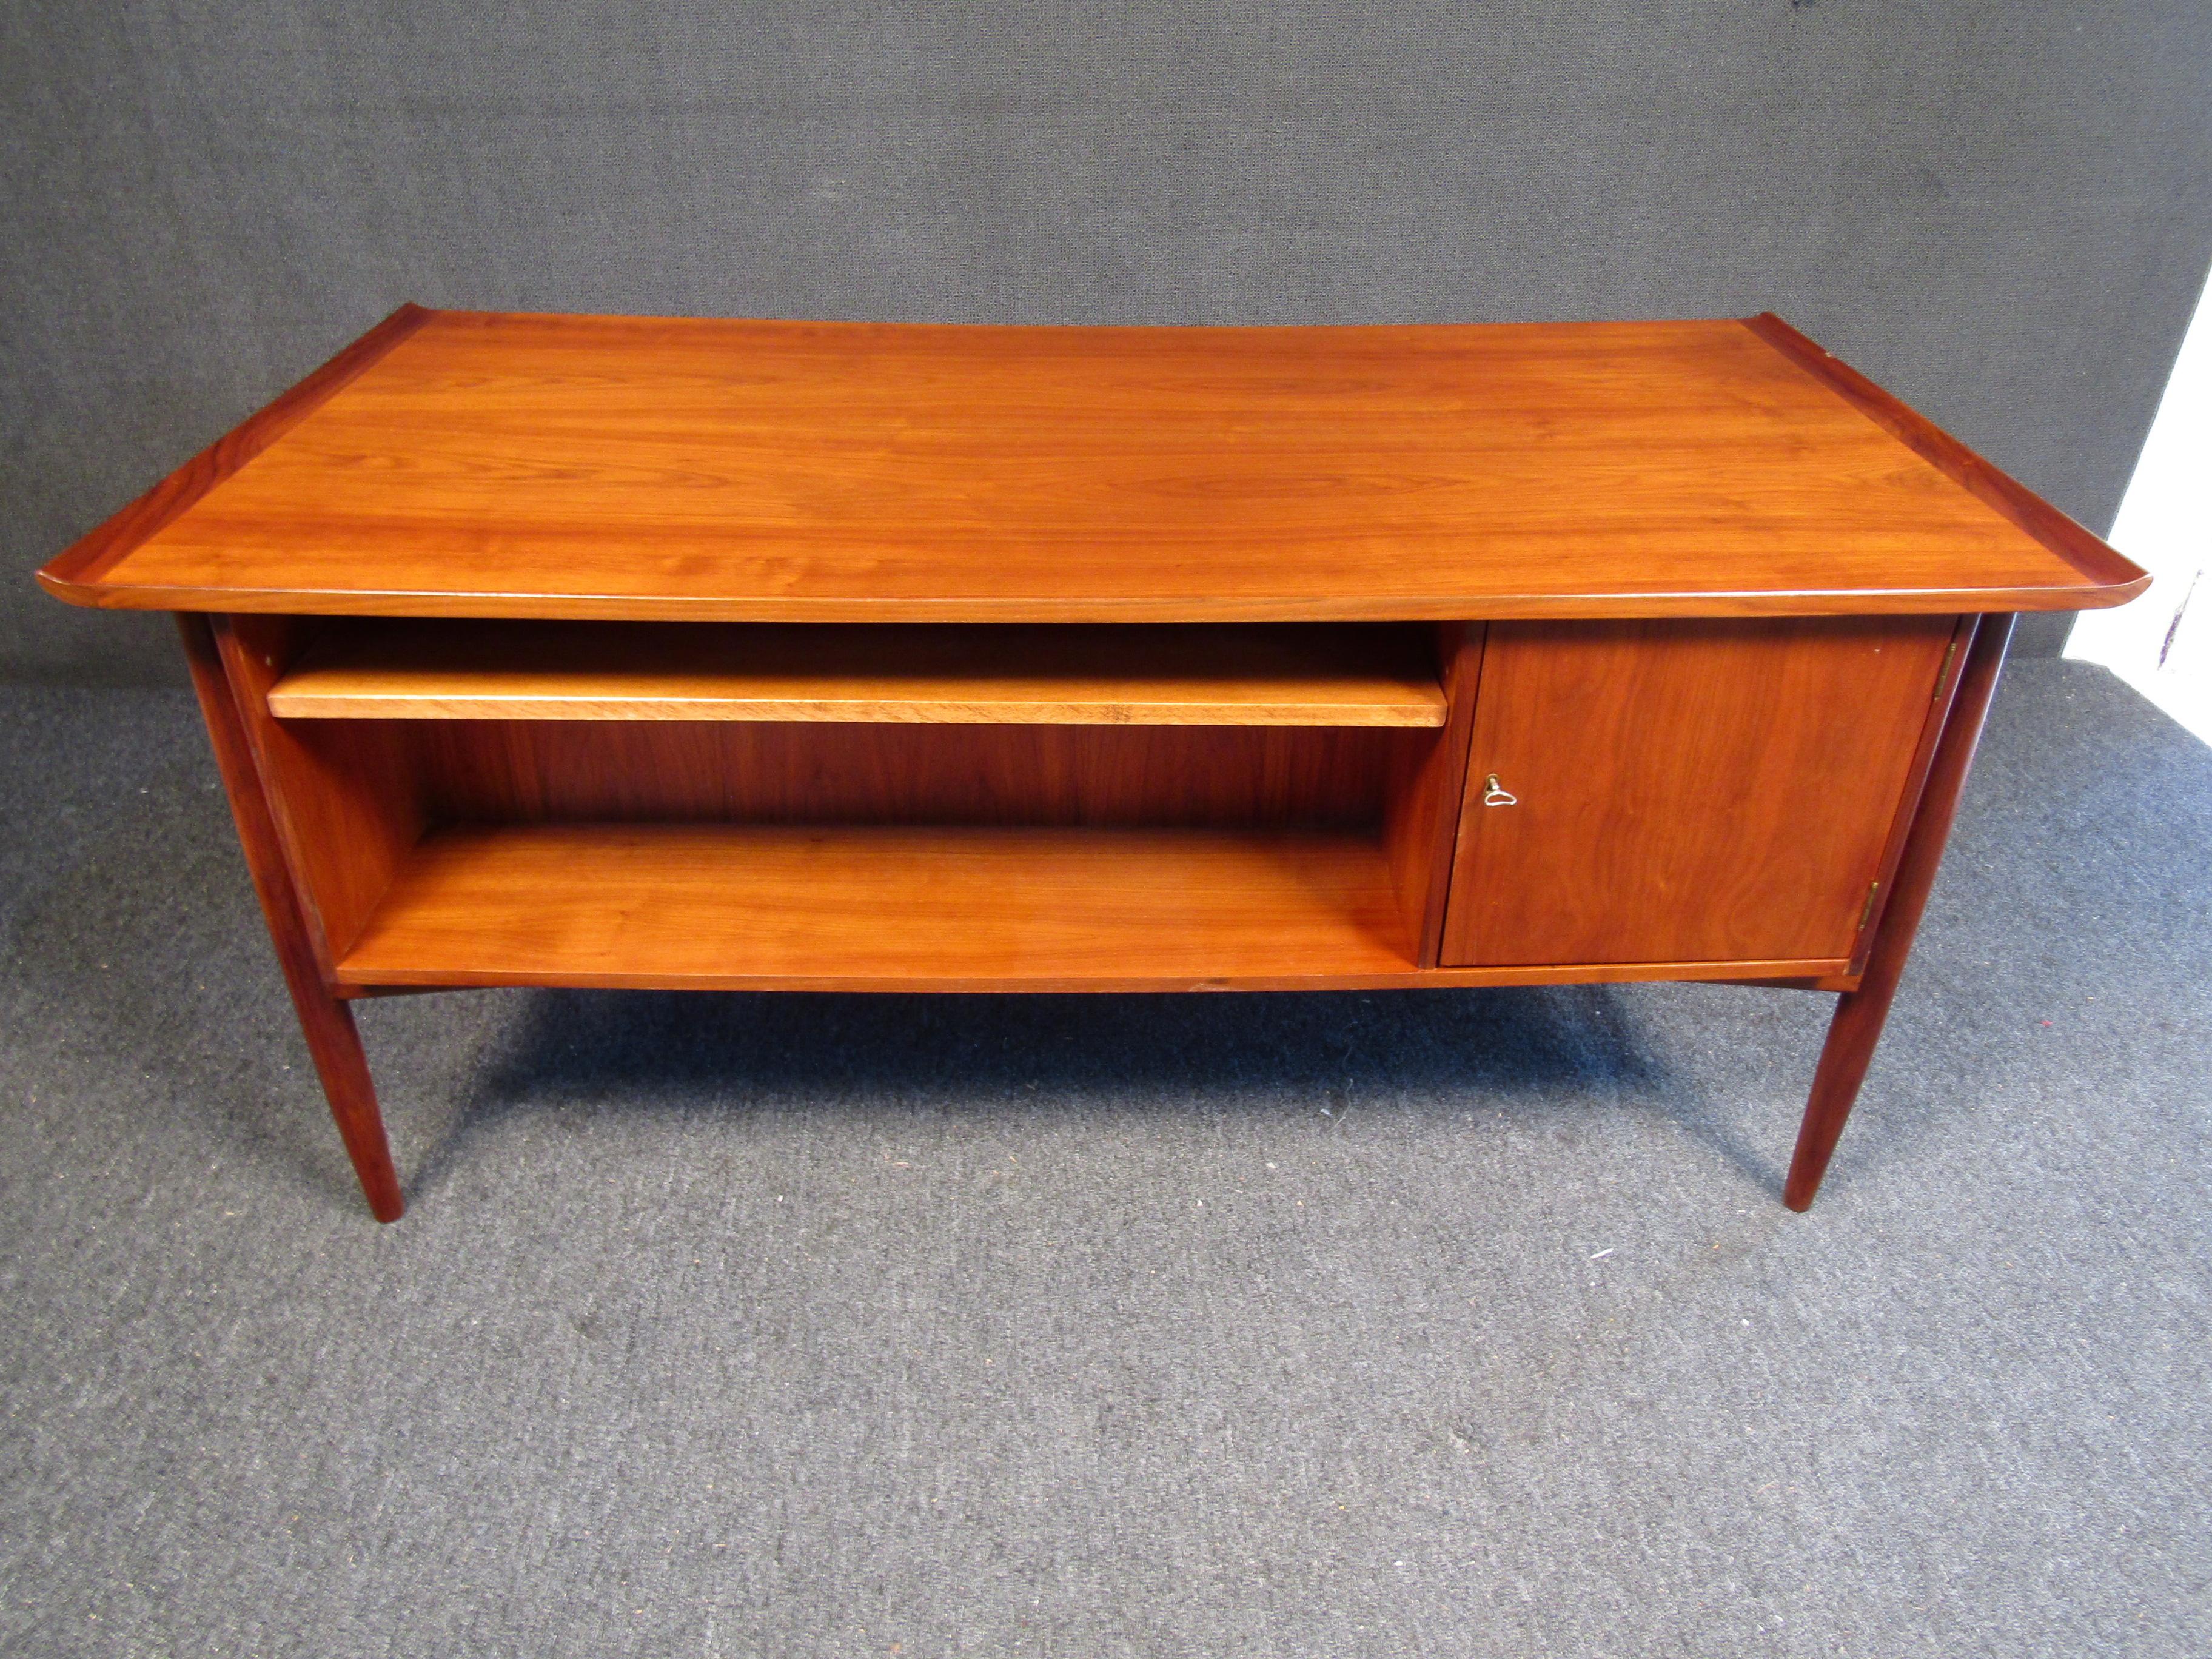 This vintage danish executive desk in teak features a raised sculpted top and tapered legs. This versatile piece can be showcased from all angles and includes a backside shelf and cabinet compartment, as well as four drawers in the front to